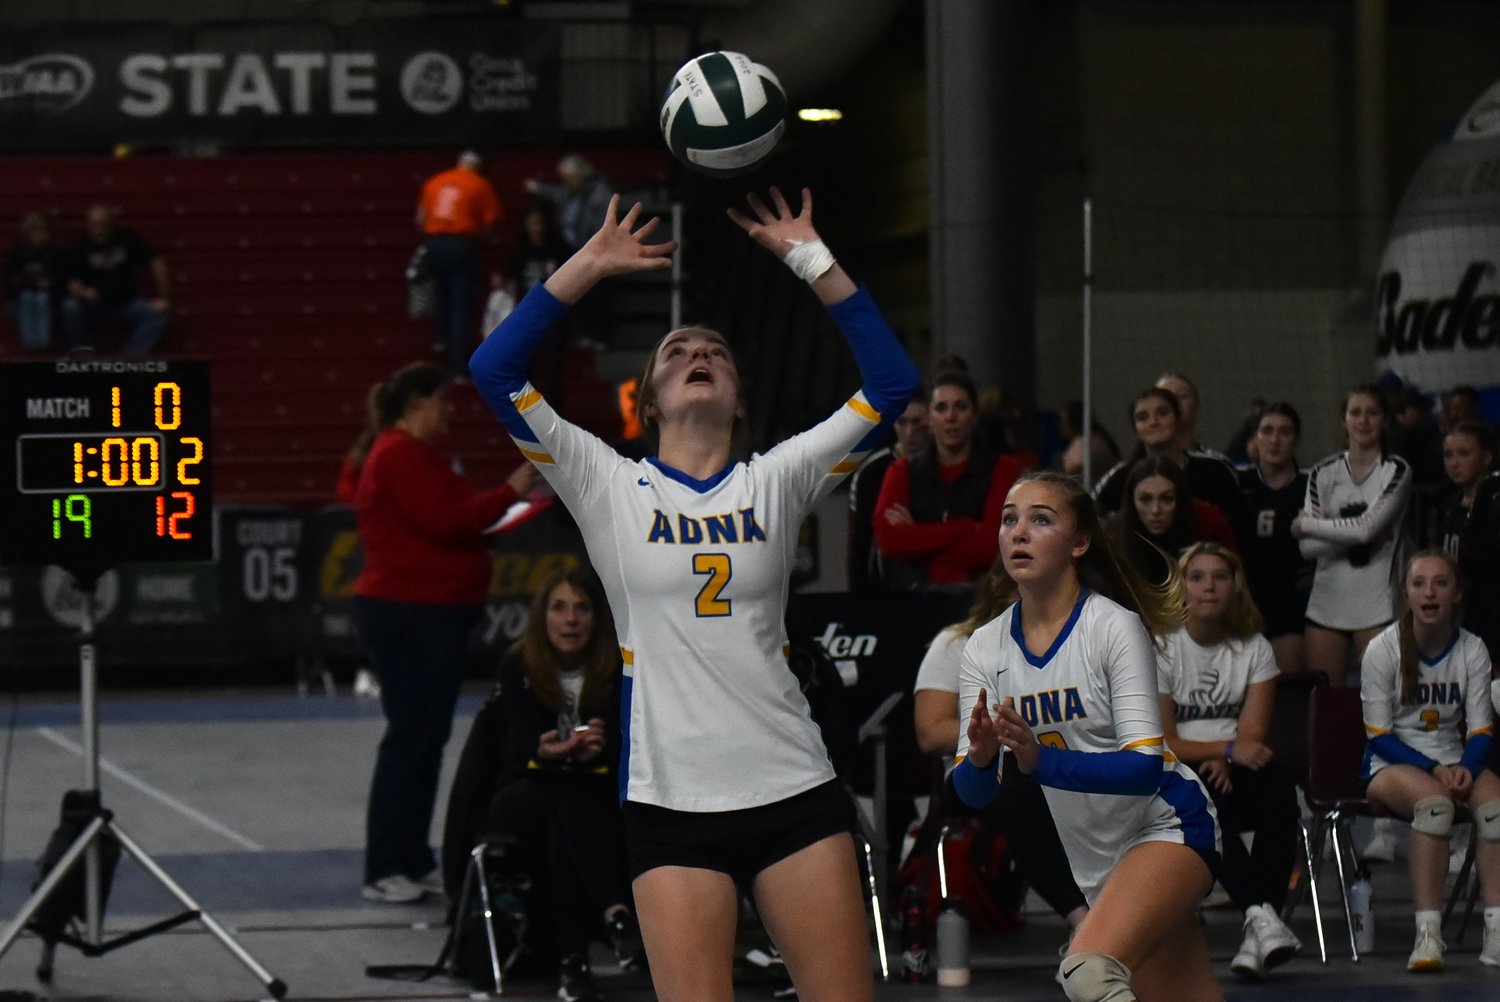 Adna setter Brooklyn Loose puts one up during the Pirates' loss to Colfax in the quarterfinals of the 2B state tournament on Nov. 10 in Yakima.